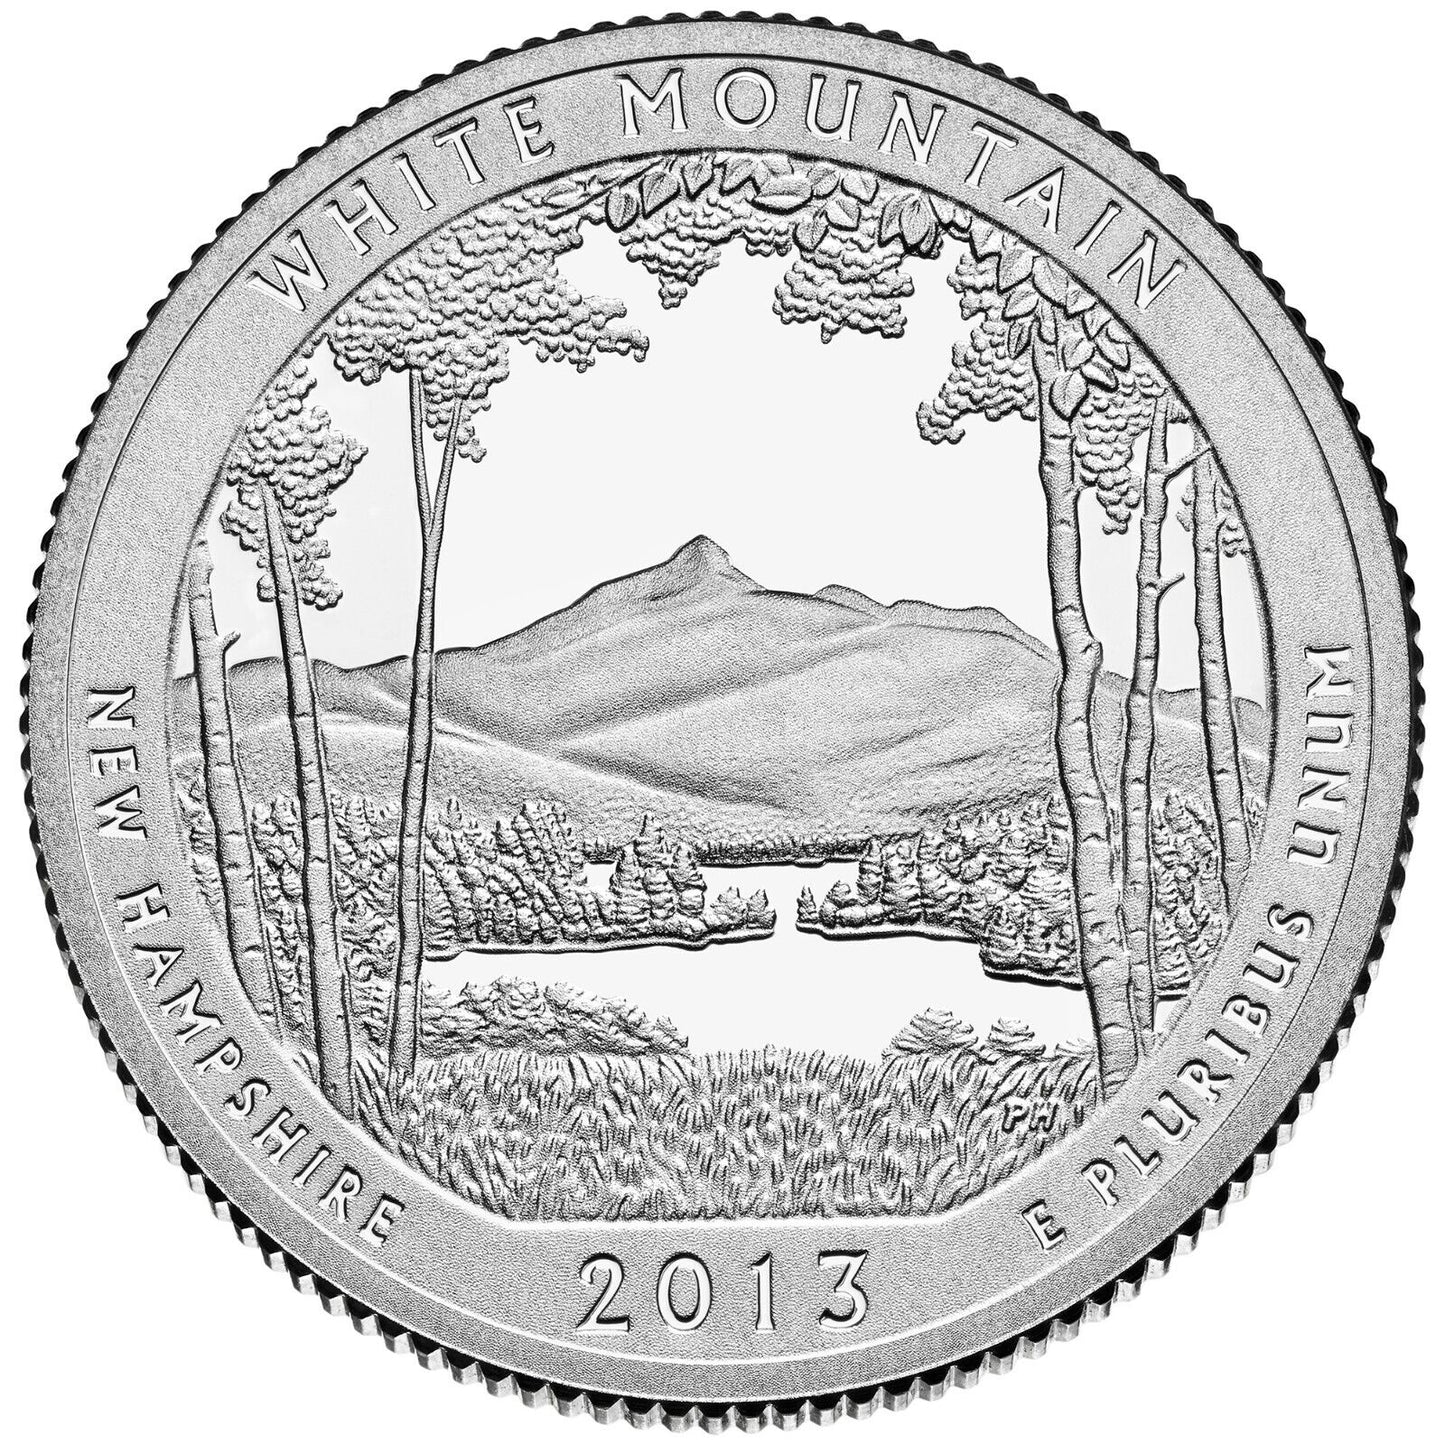 2013 S White Mountain New Hampshire Clad Proof Quarter ☆☆ National Parks ATB ☆☆